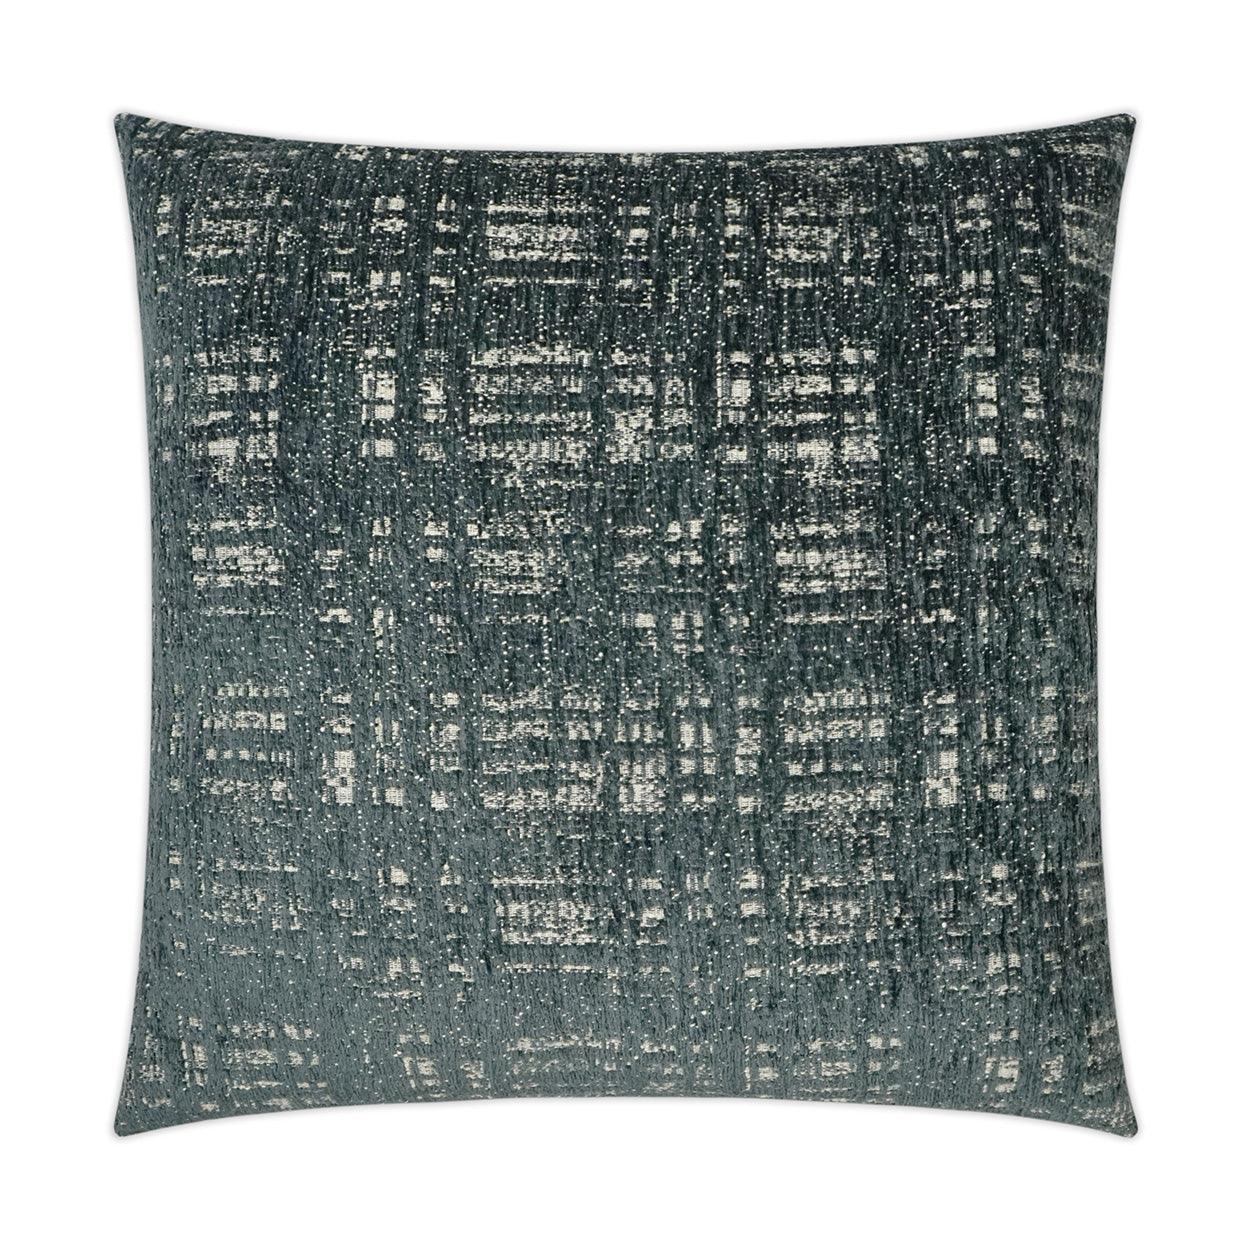 Collateral Iron Textured Slate Blue Large Throw Pillow With Insert - Uptown Sebastian